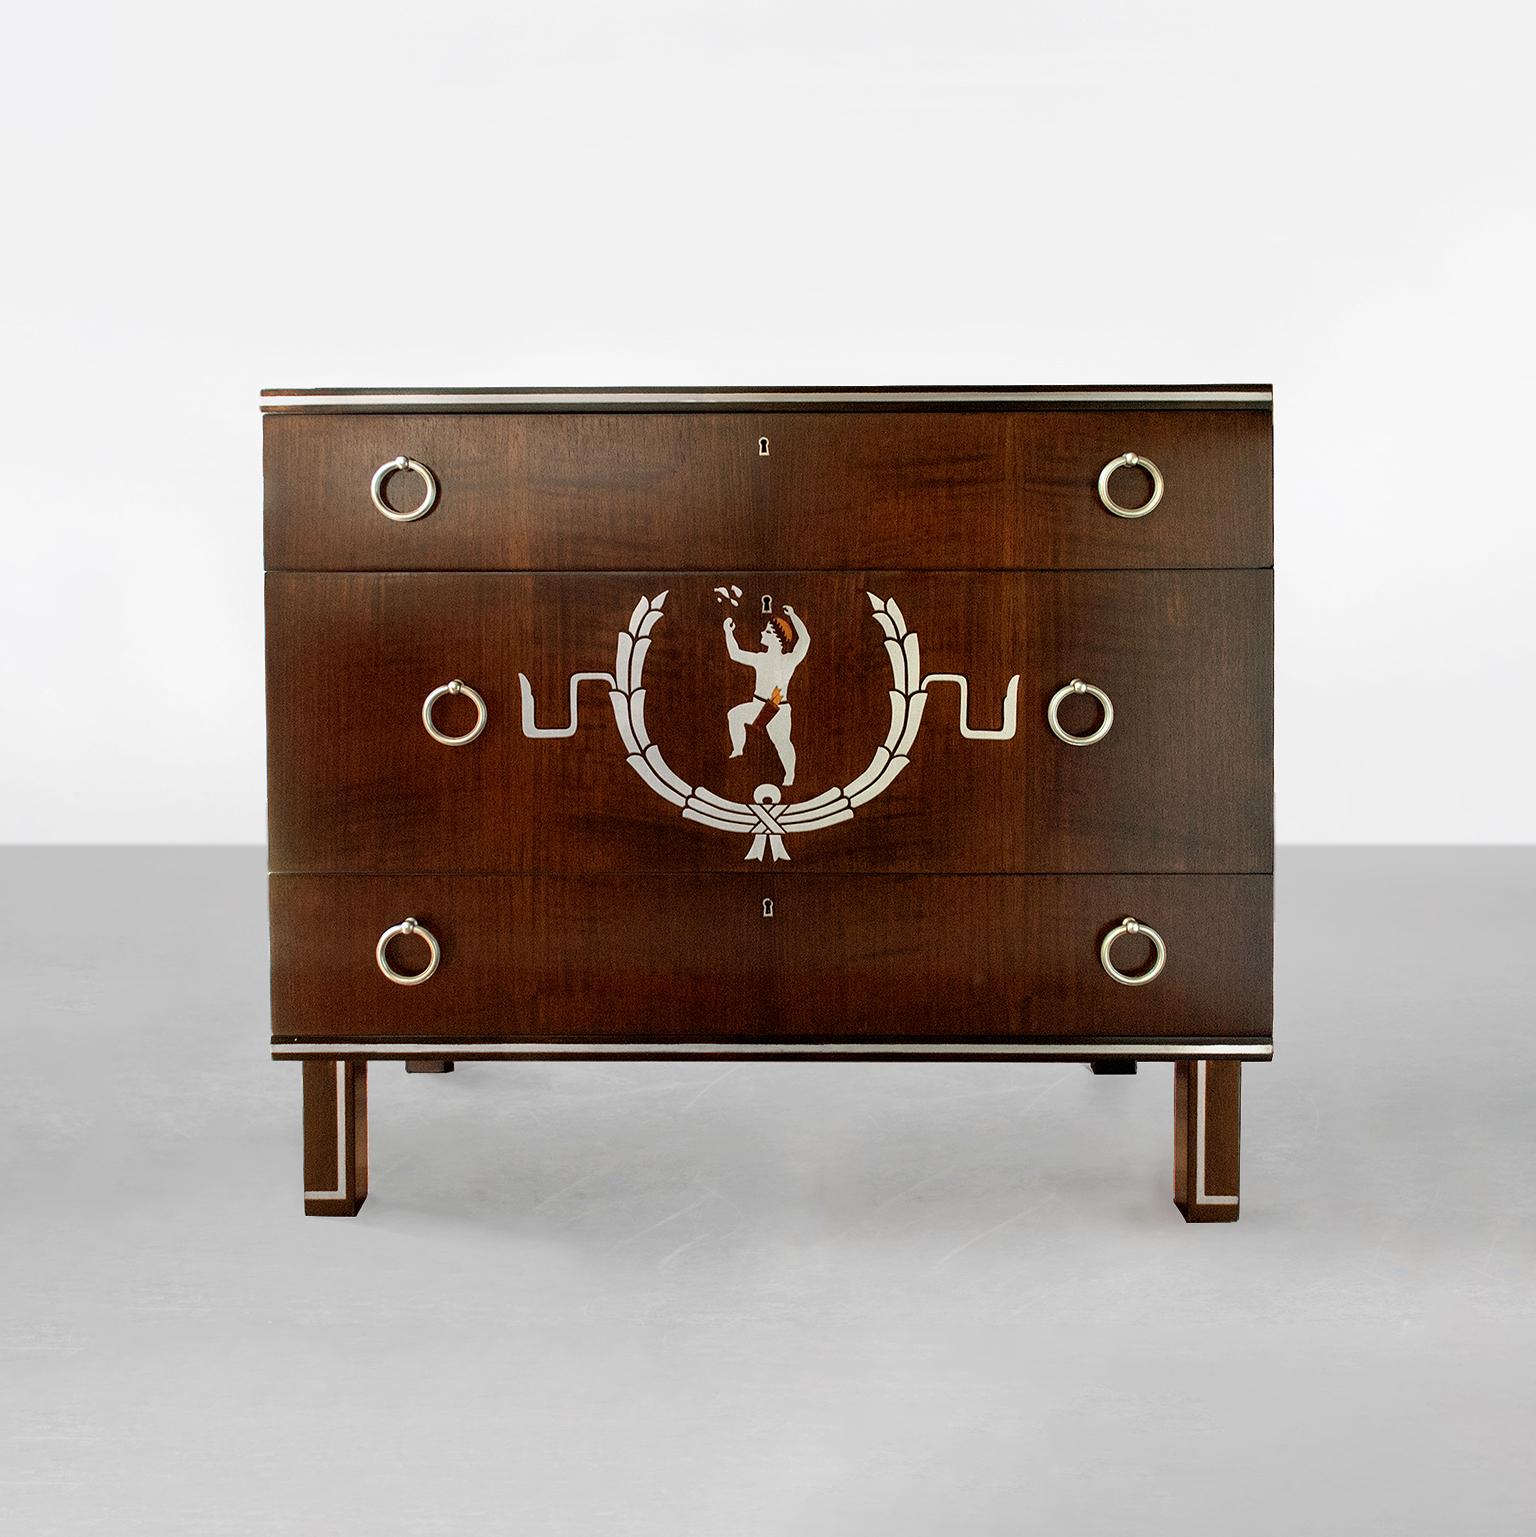 Superb Scandinavian Modern, three-drawer chest with wood marquetry and inlay in pewter. The chest's centre drawer features a young male figure wearing a laurel wreath on his head and a quiver around his waist. He is delighted by a butterfly which is